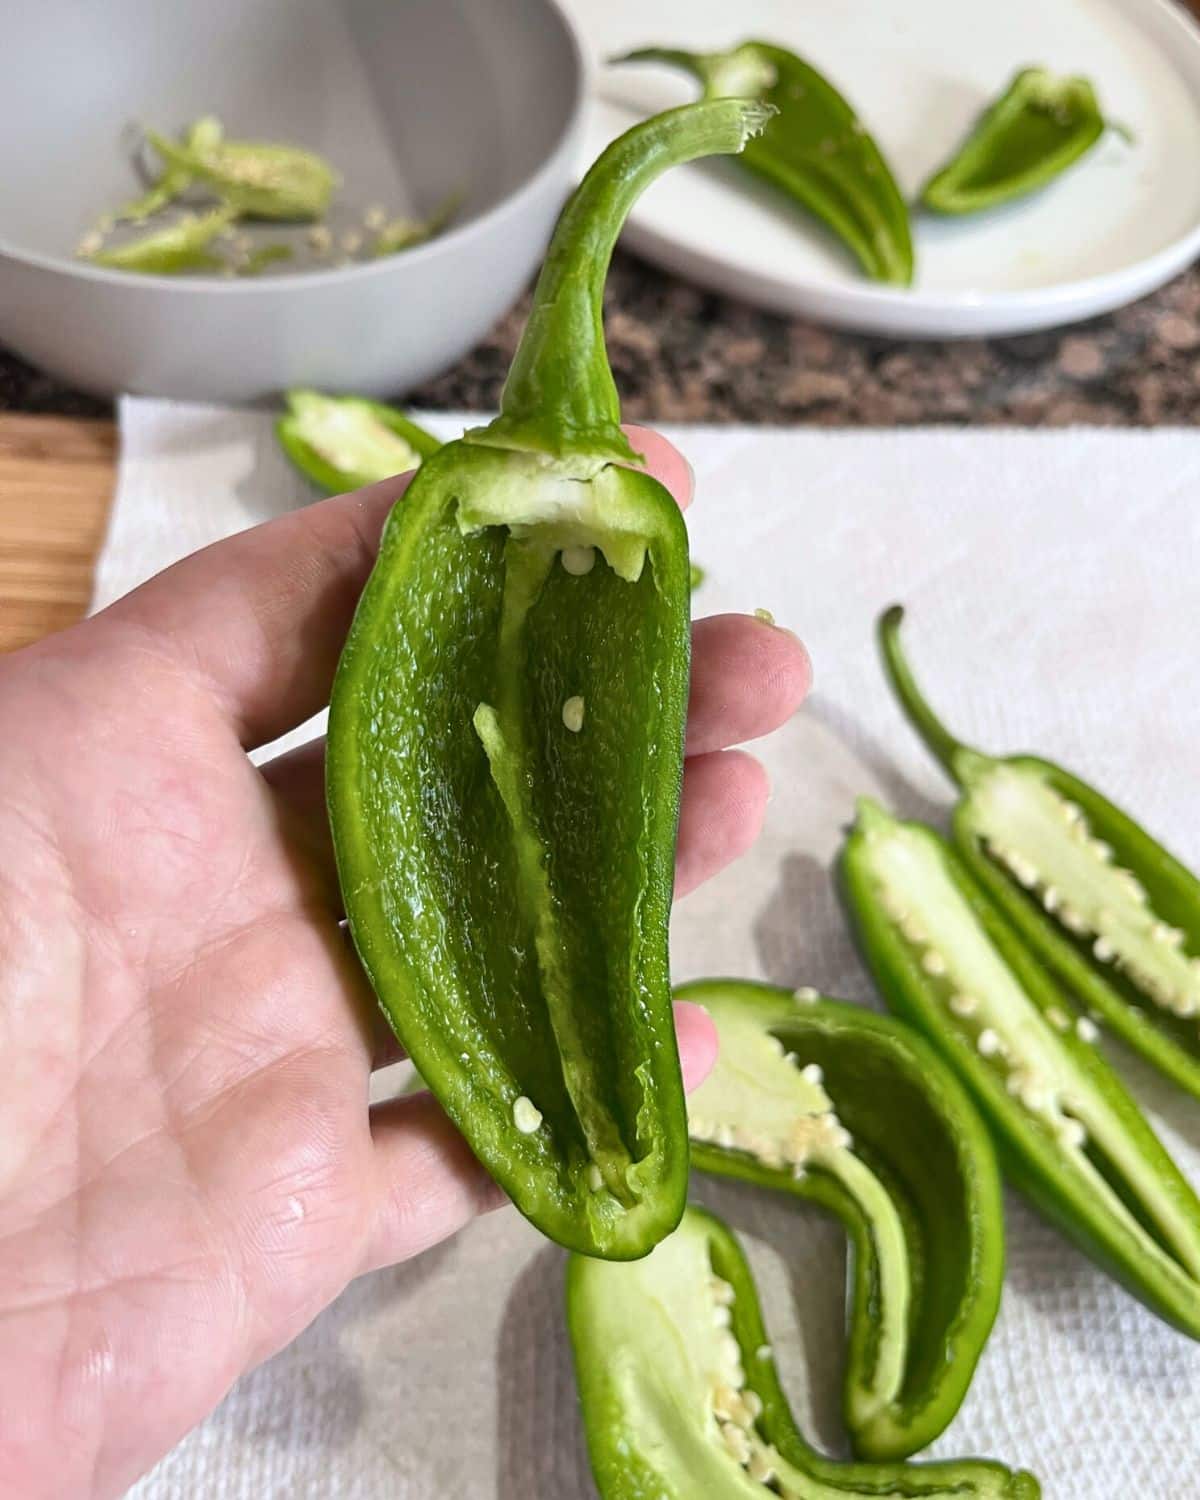 A jalapeno pepper that has been sliced down the middle, lengthwise.